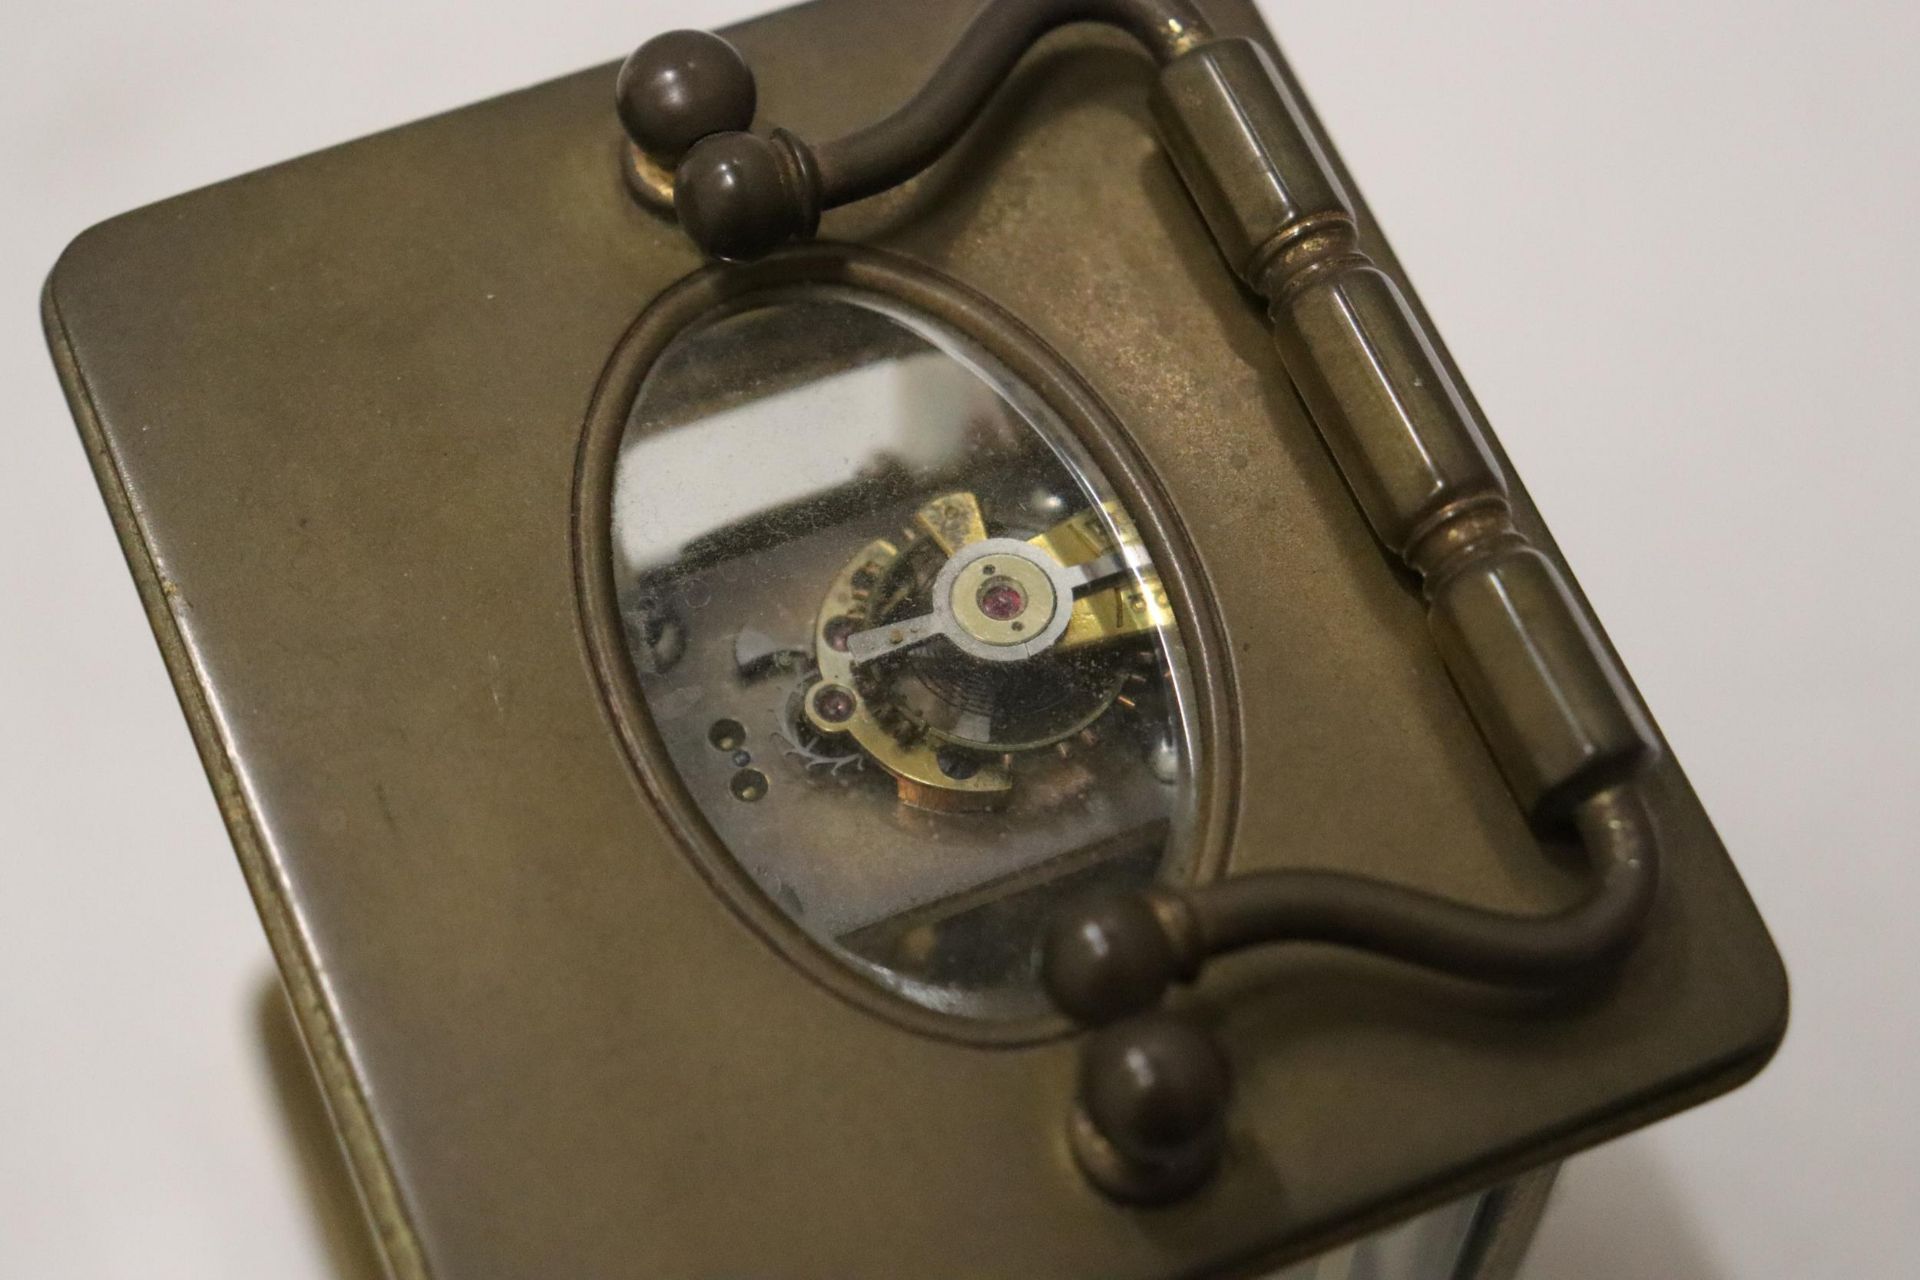 A VINTAGE BRASS ALARM CLOCK WITH GLASS SIDES TO SHOW INNER WORKINGS, IN A LEATHER CASE - Image 9 of 11